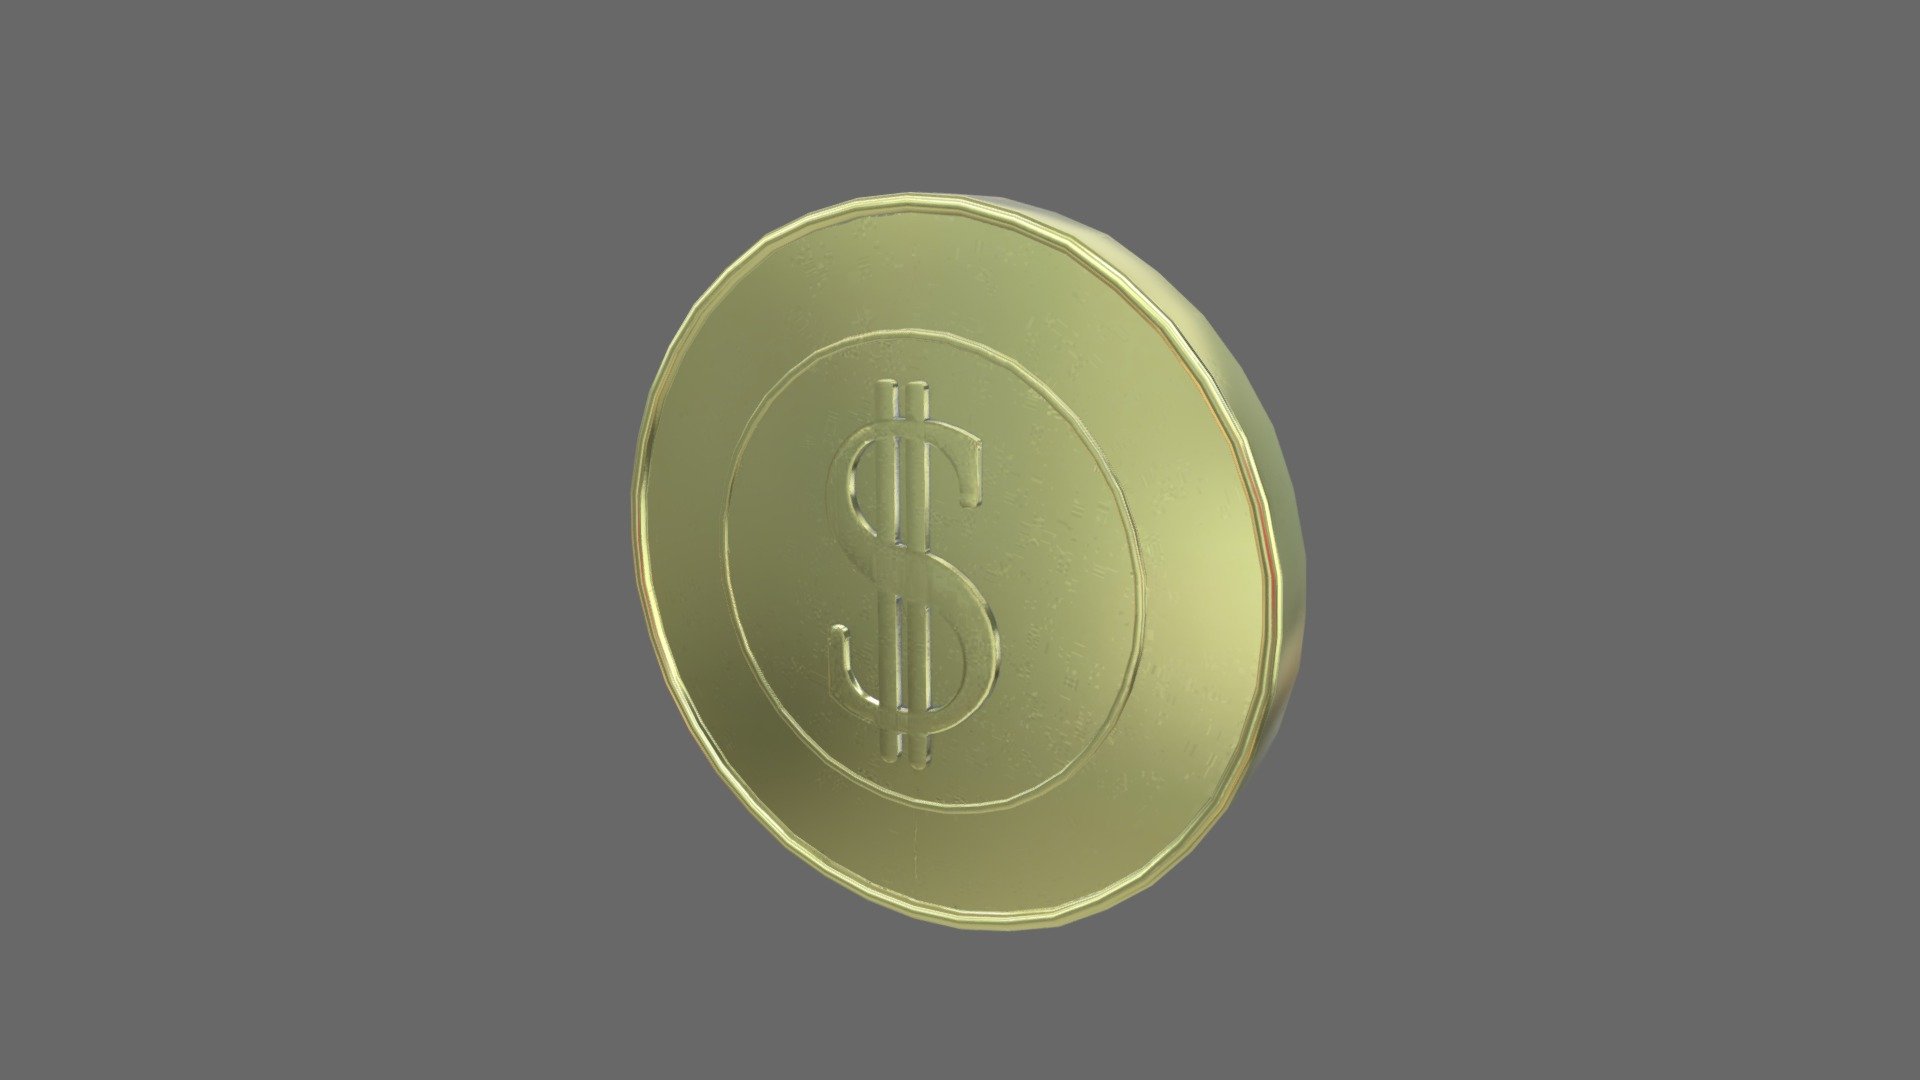 A simple coin I made using Maya and Substance Painter - Coin - 3D model by Luke (@LukeWolfe) 3d model